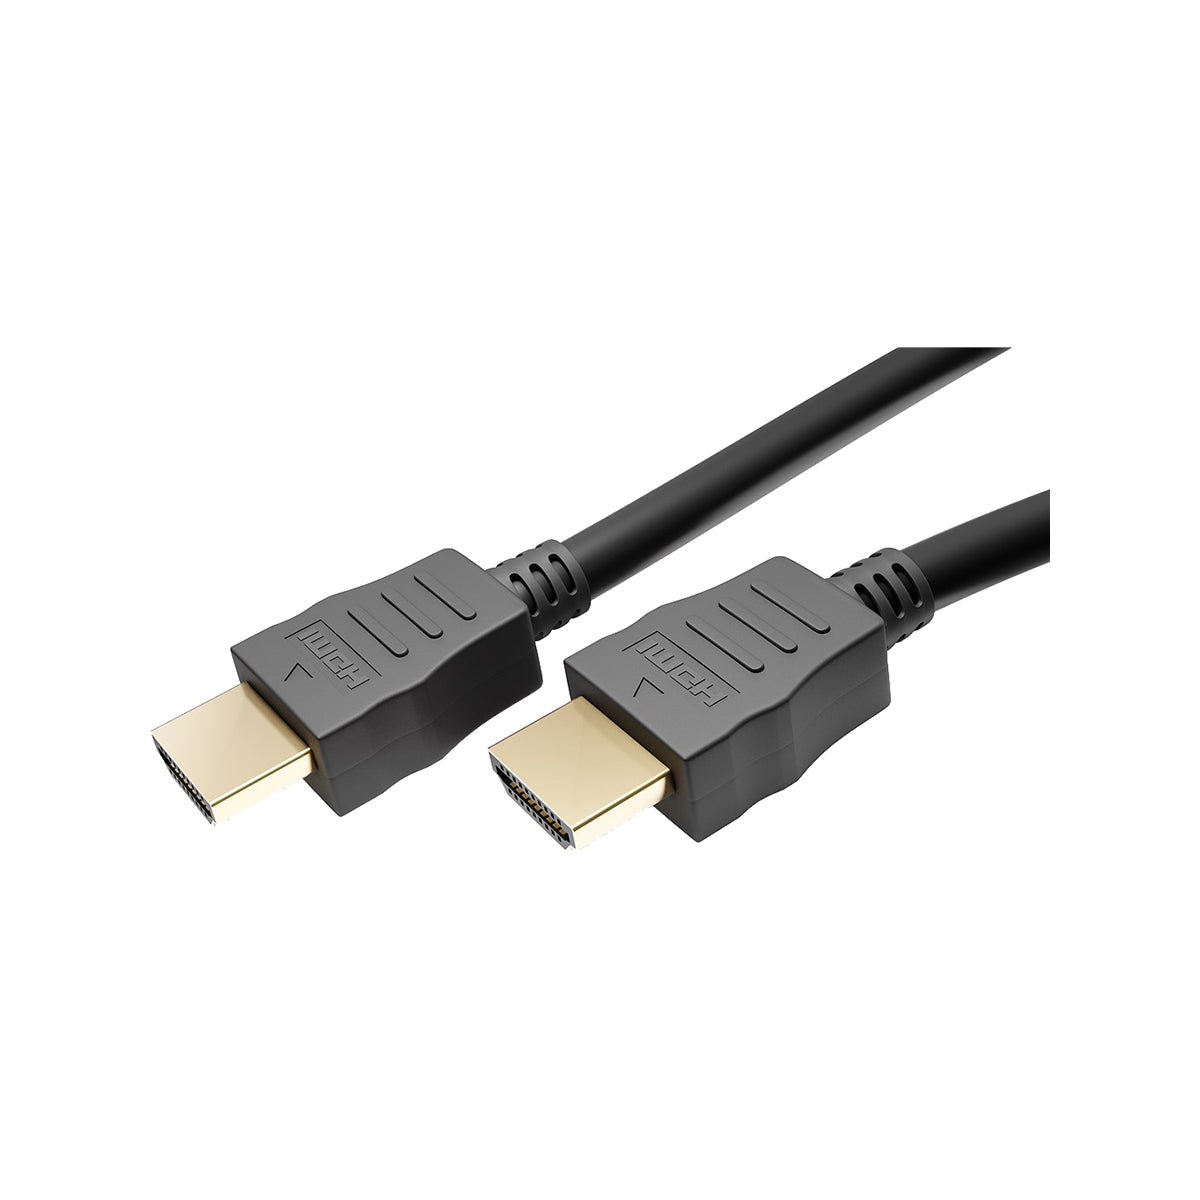 Goobay High Speed HDMI™ Cable with Ethernet (4K@60Hz) 3M for Laptops